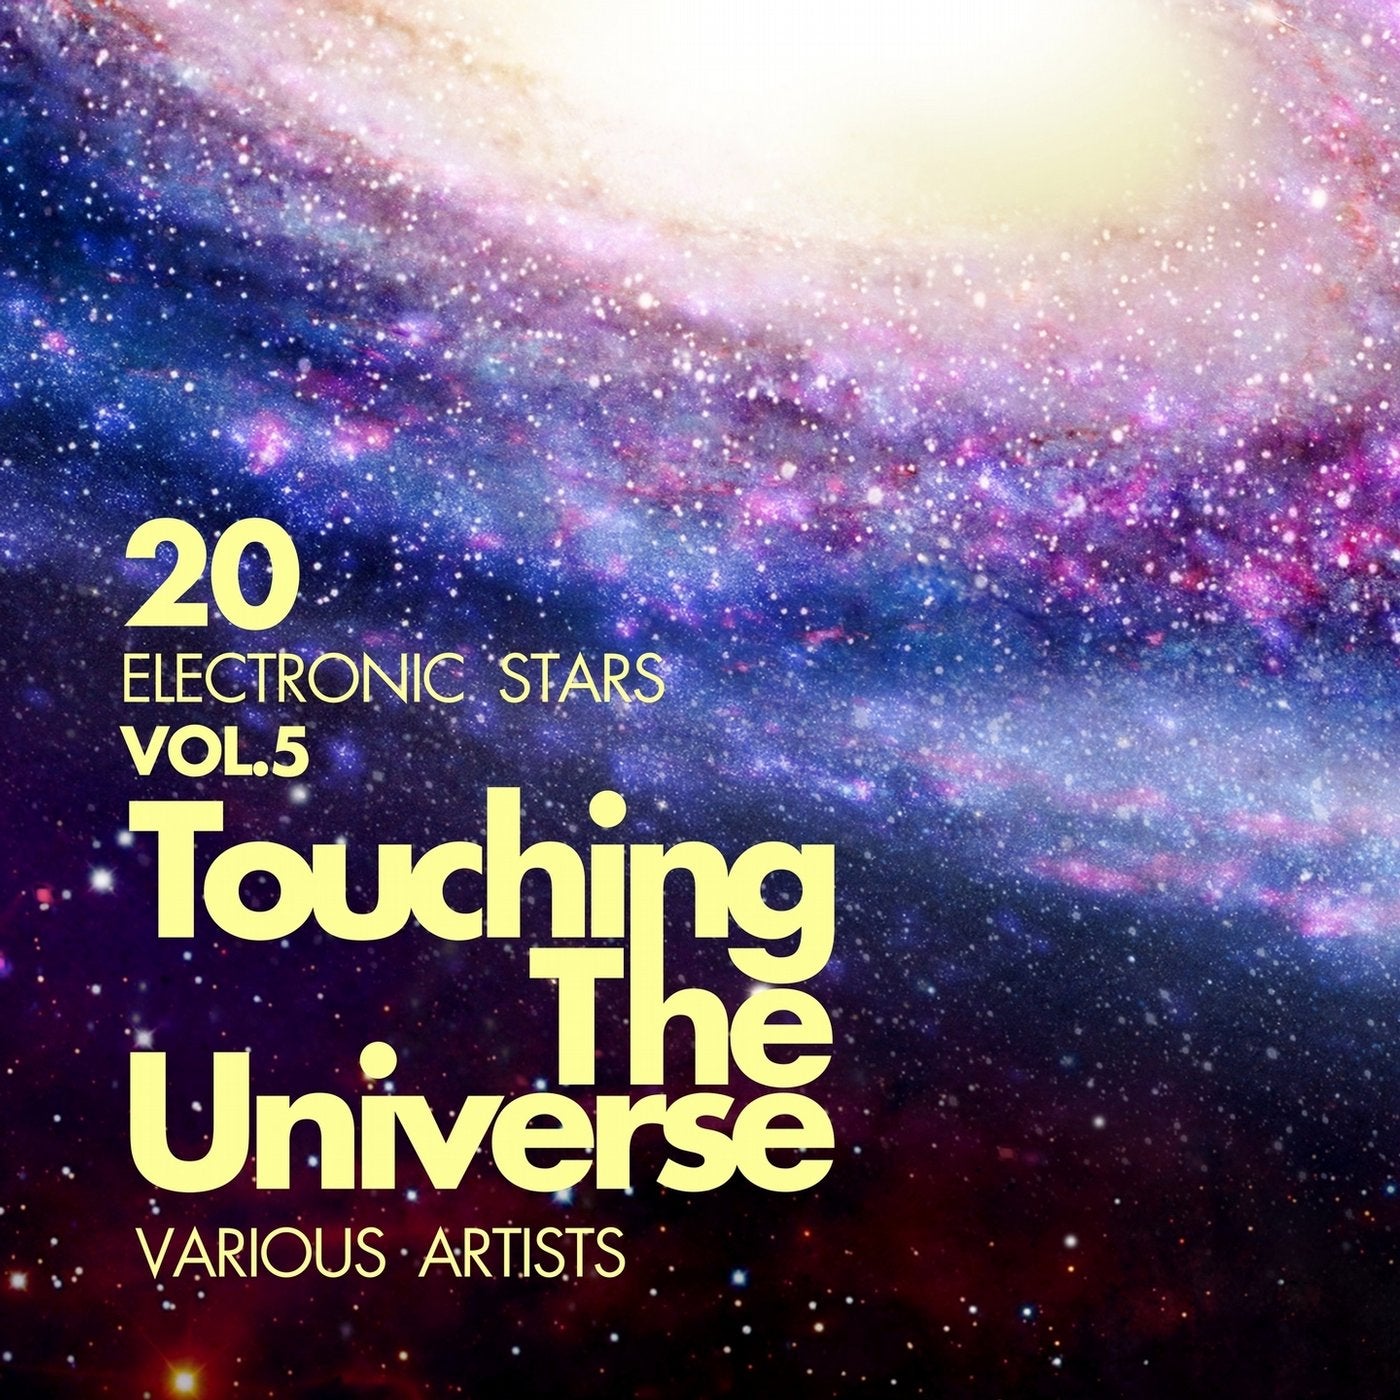 Touching The Universe, Vol. 5 (20 Electronic Stars)